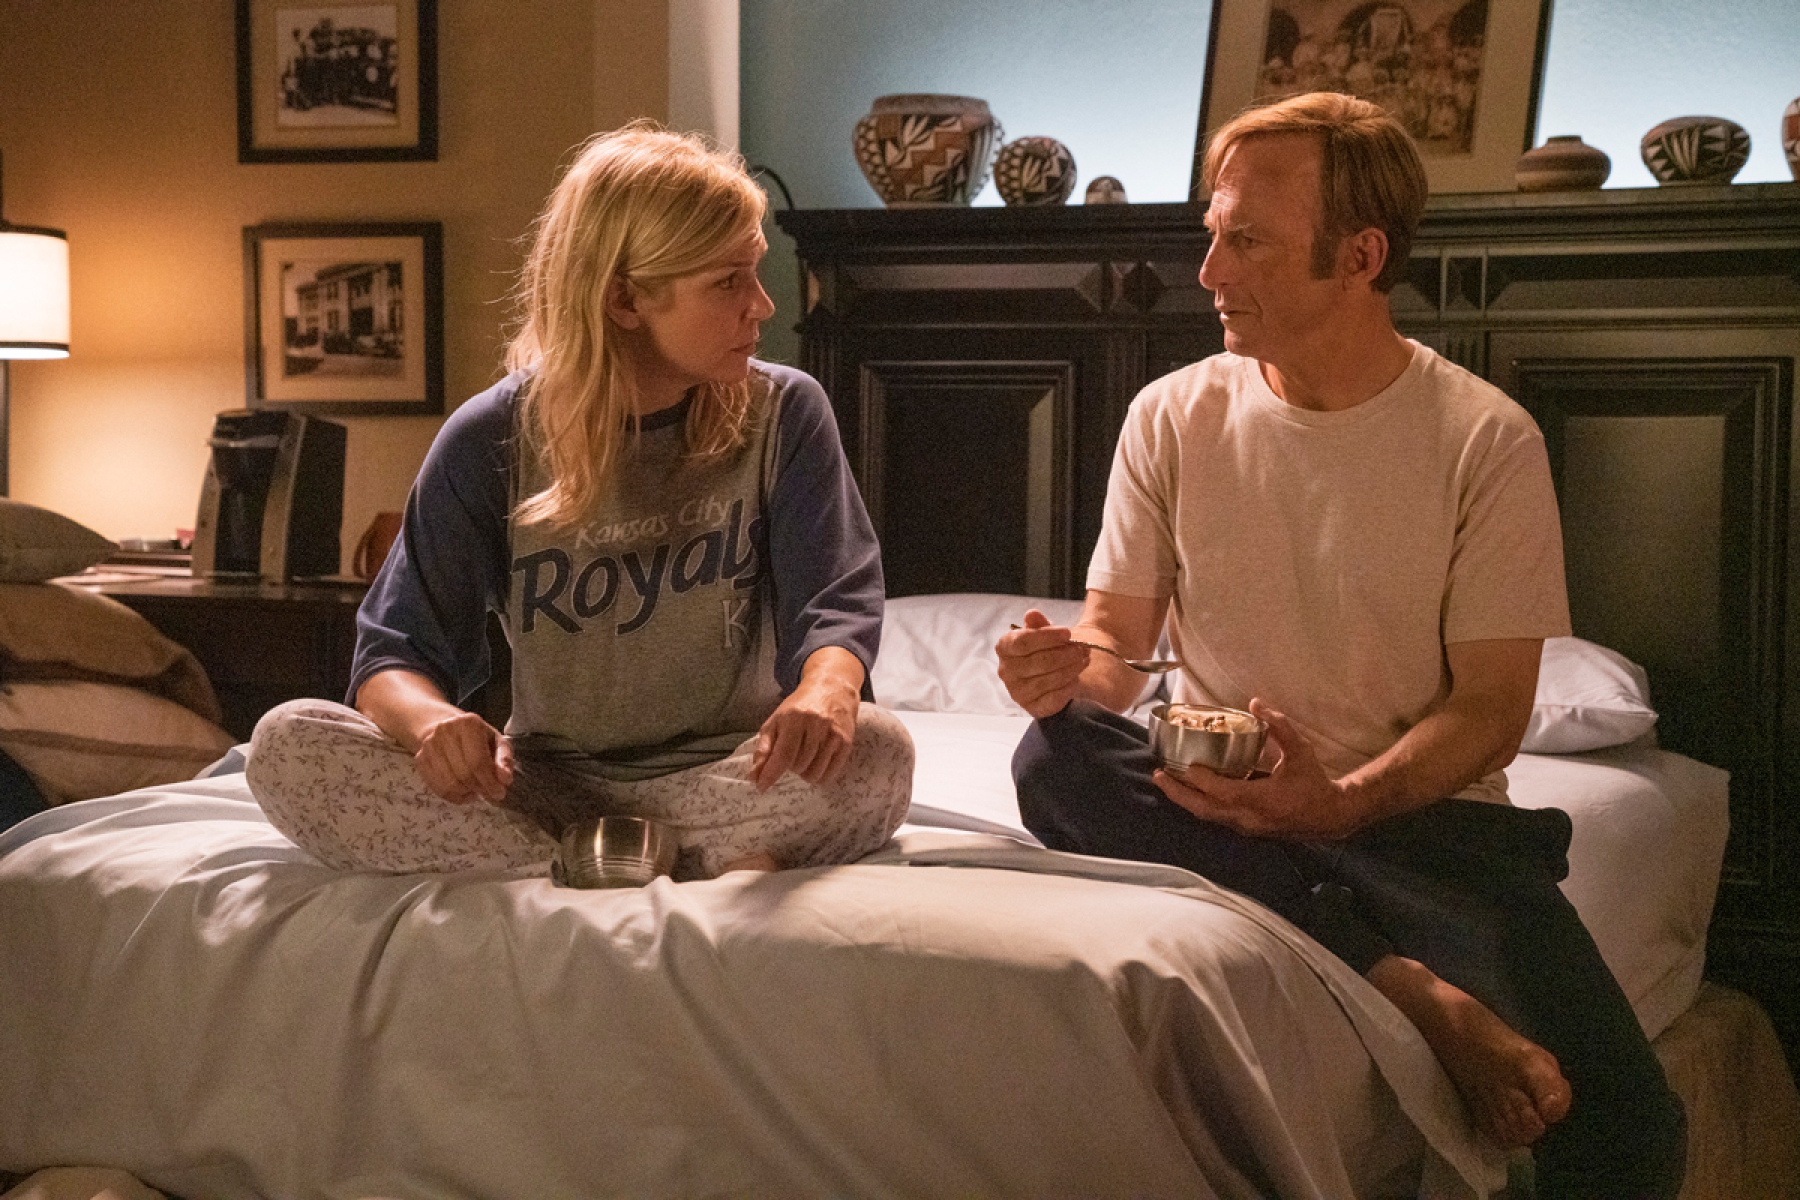 Rhea Seehorn as Kim Wexler, Bob Odenkirk as Jimmy McGill - Better Call Saul _ Season 5, Episode 10 - Photo Credit: Greg Lewis/AMC/Sony Pictures Television